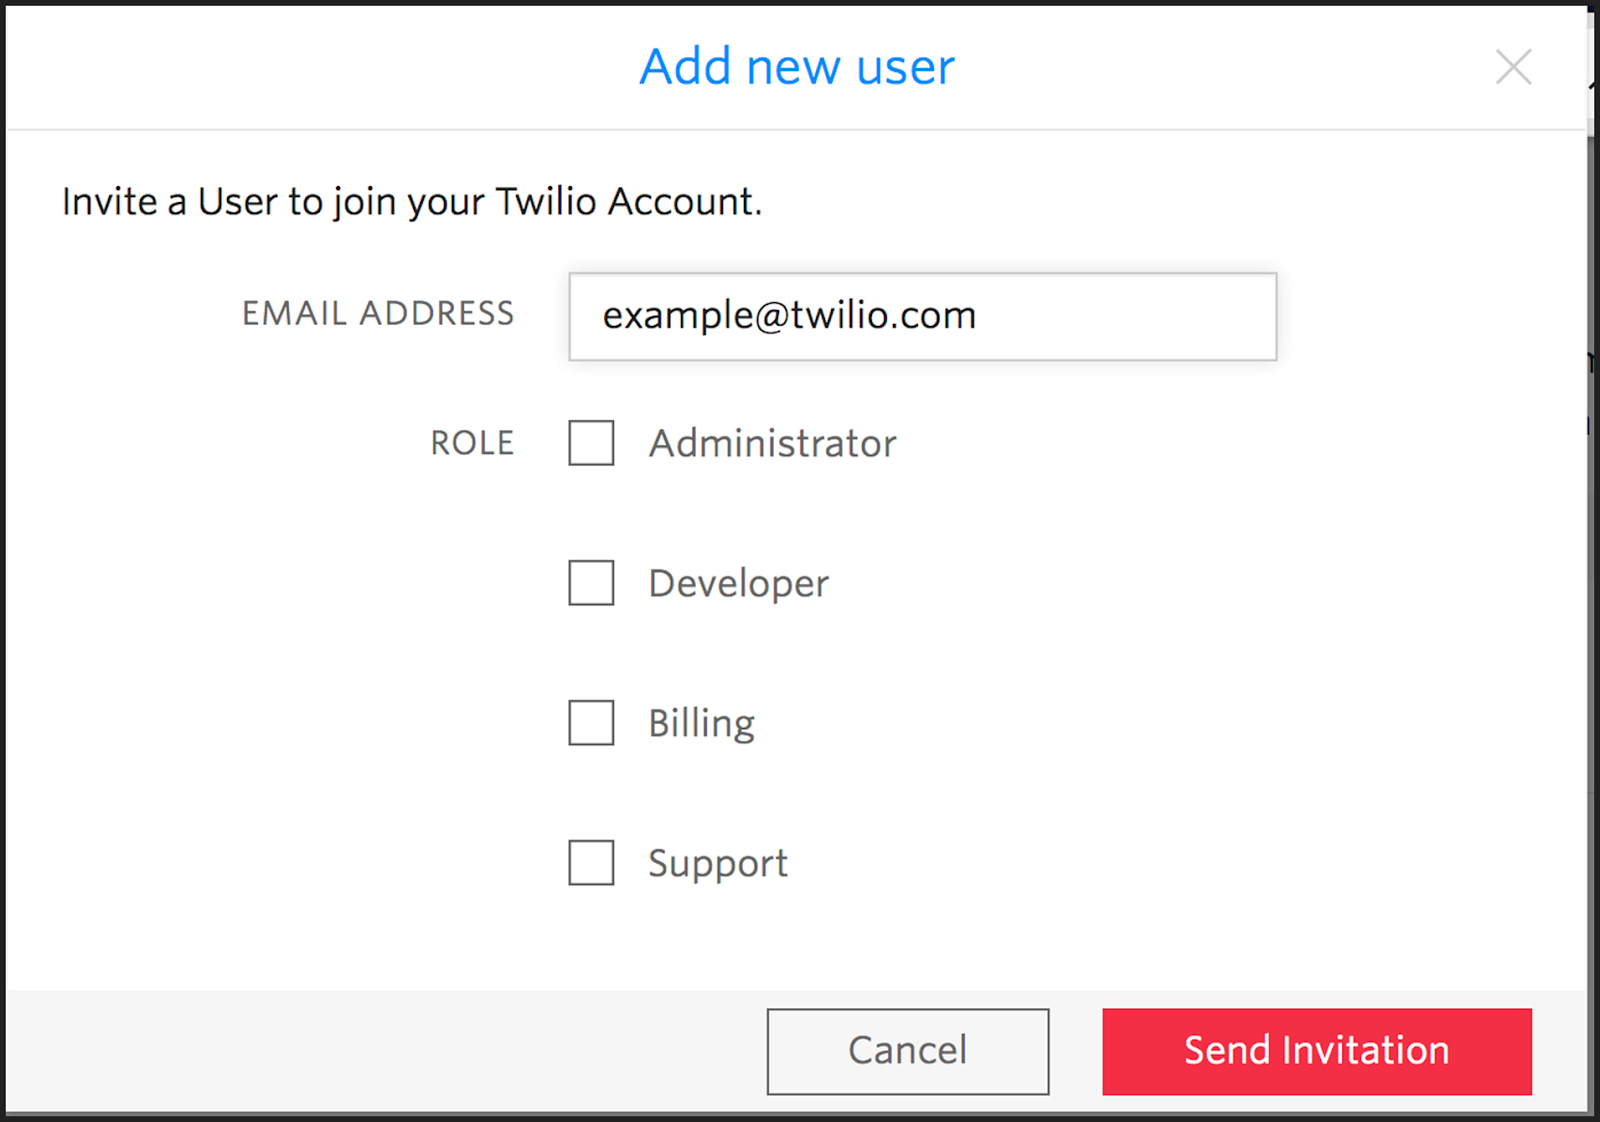 Add an authorized Twilio user to an account